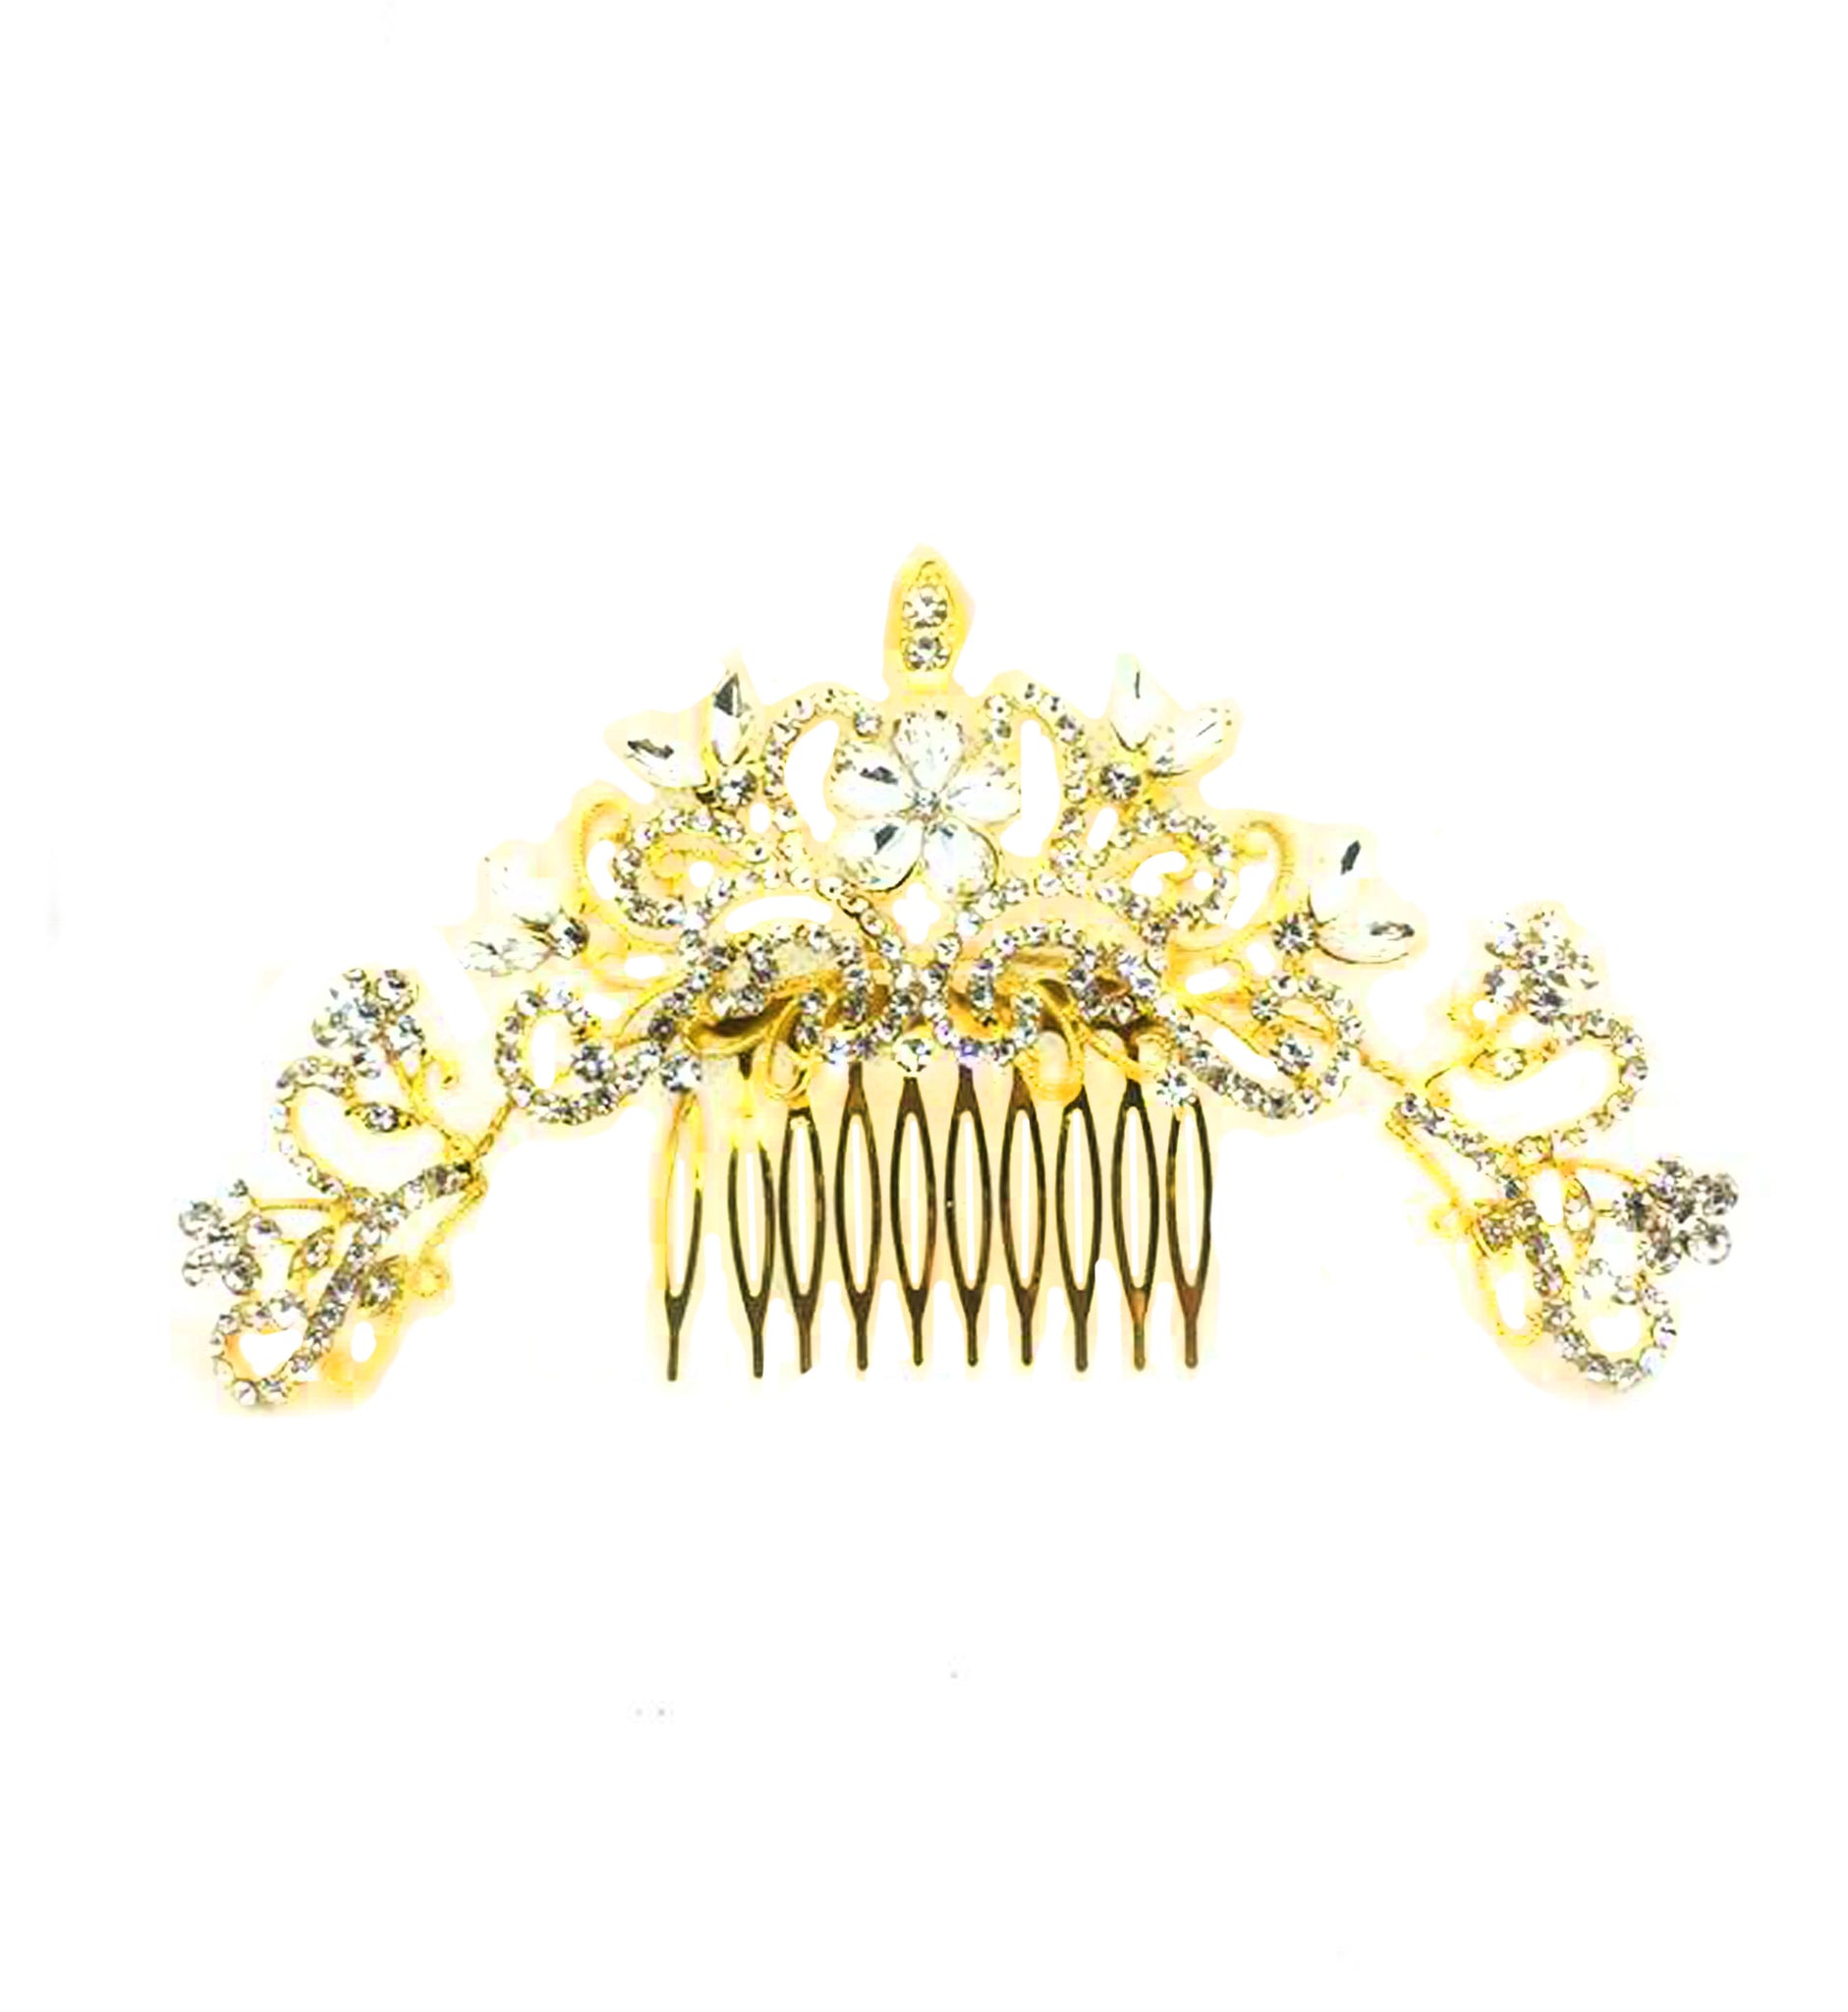 Bride Wedding Hair Comb Crystal Hair Jewelry Headpieces Side Comb Bridal Decorative Prom Hair Accessories for Women and Girls - Simpal Boutique